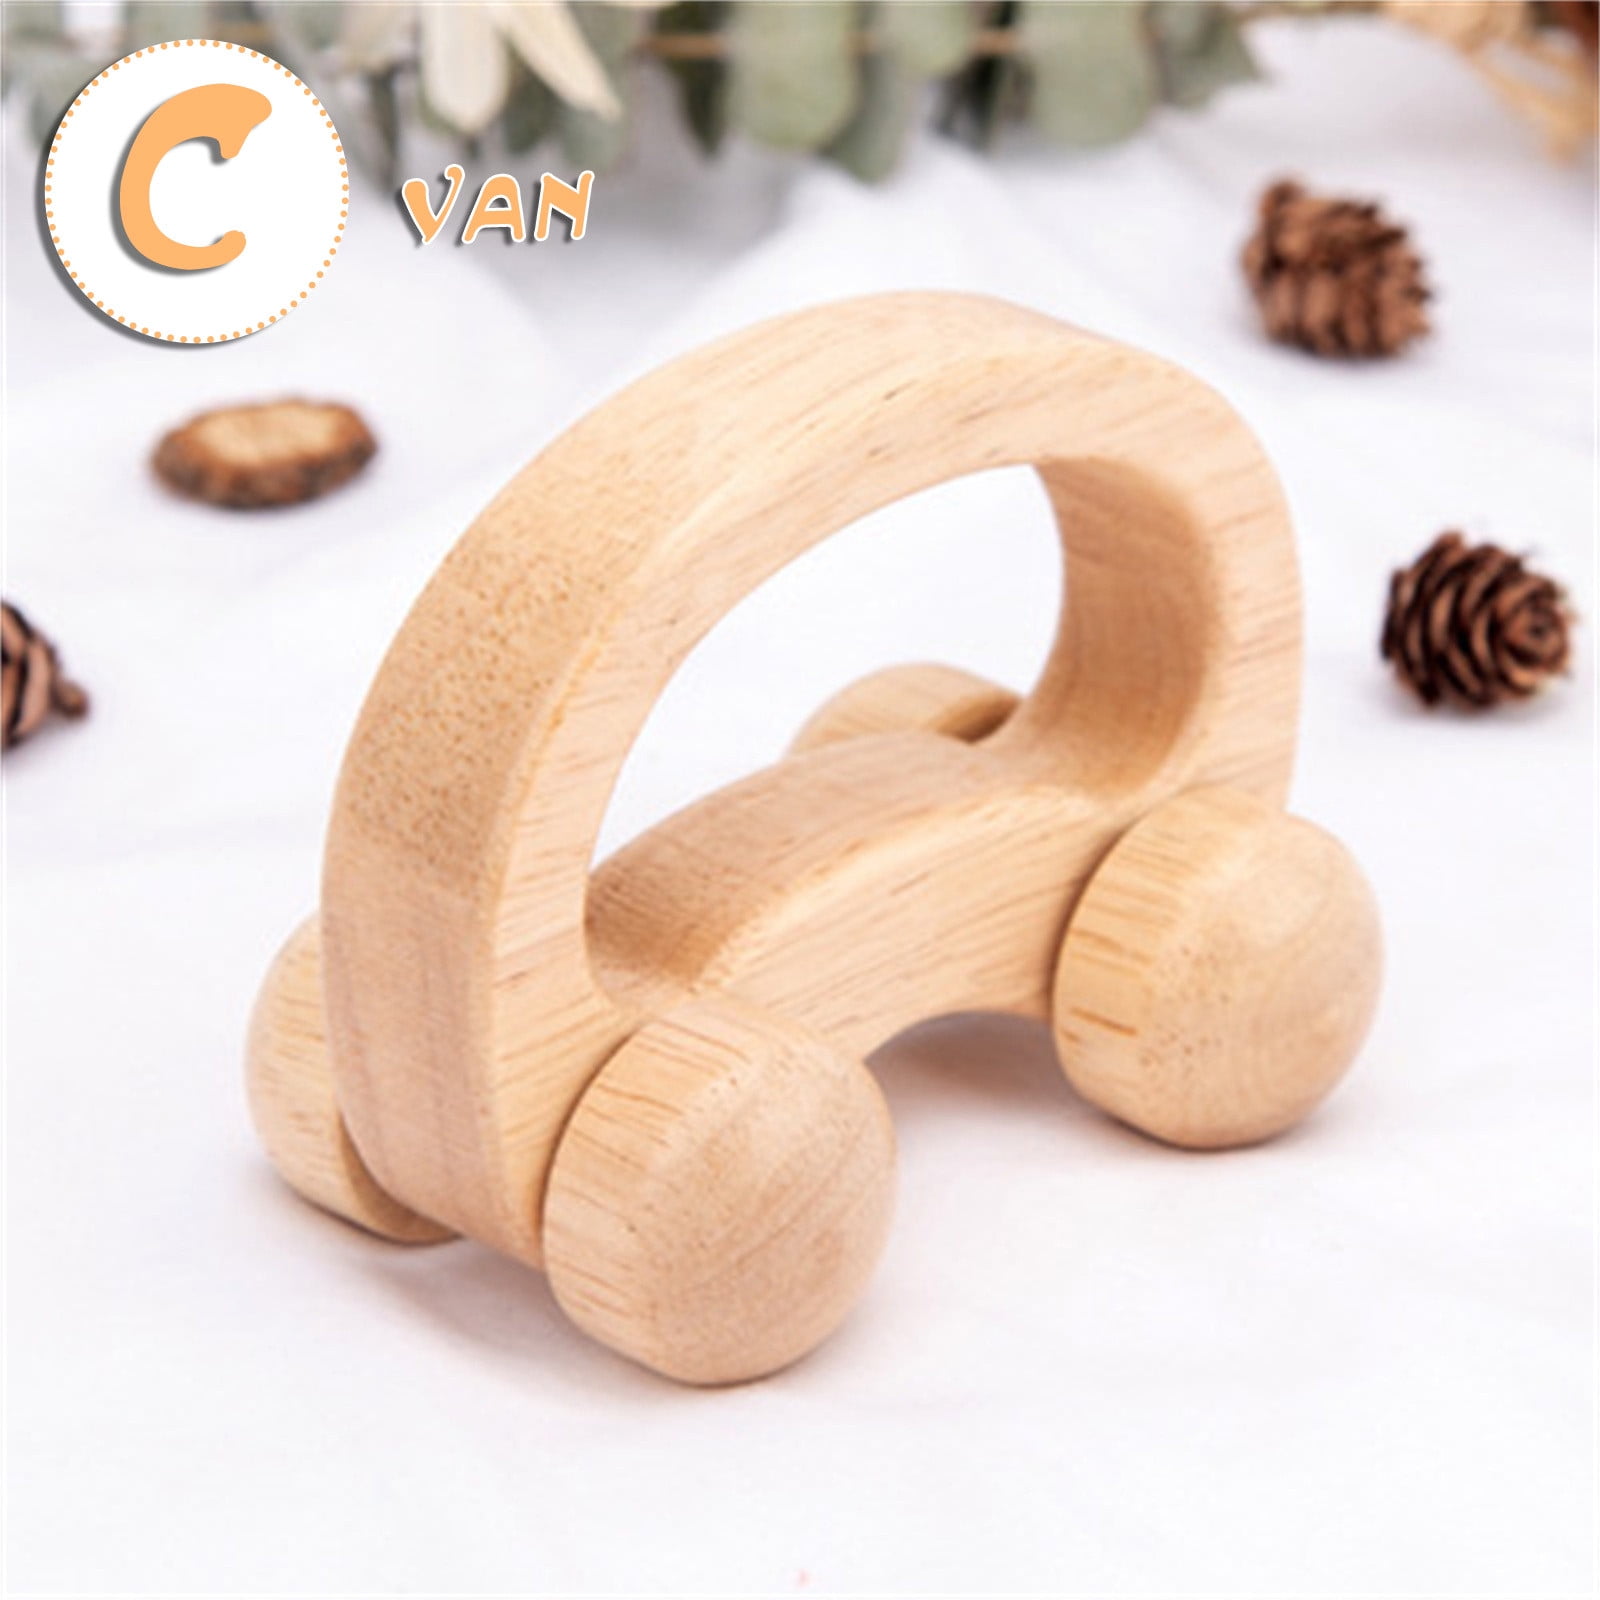 Handcrafted Wooden Eco Friendly Toy Car 3pc Wooden car Toys Montessori Nursing Wooden Rattle Toy Cars